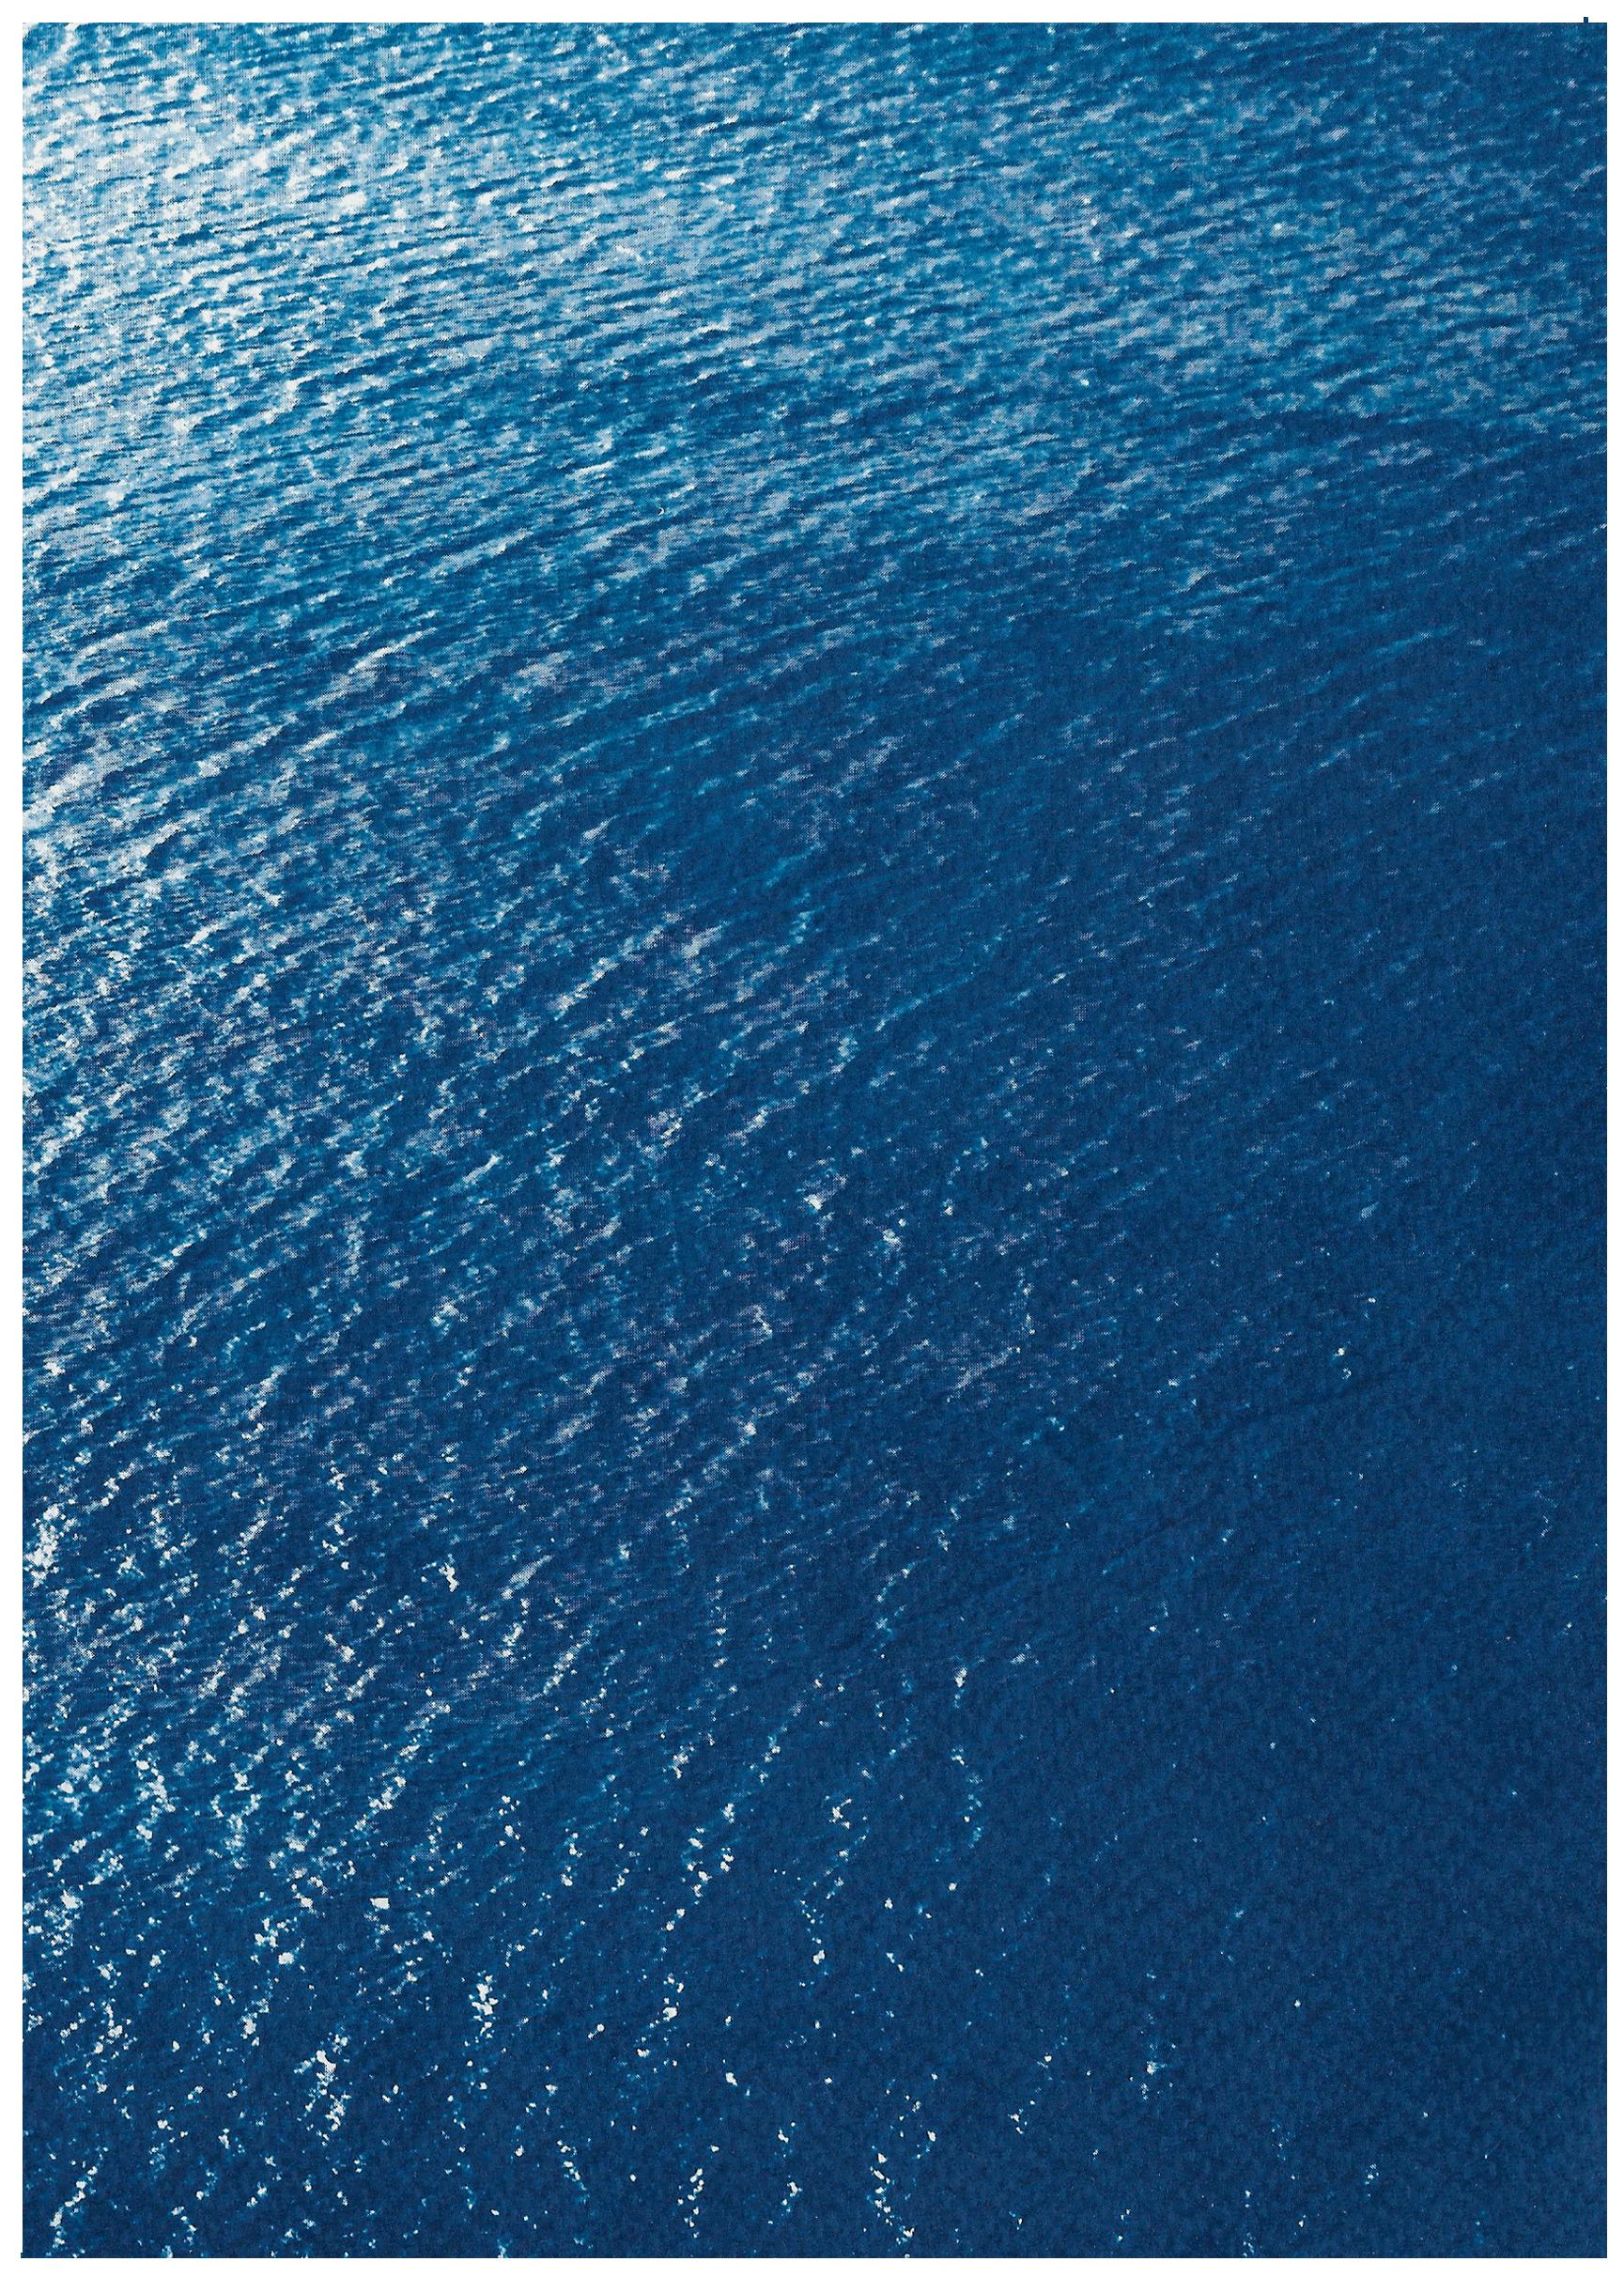 Nautical Diptych of Smooth Bay in the Mediterranean, Zen Waters Cyanotype, Paper - Blue Landscape Painting by Kind of Cyan